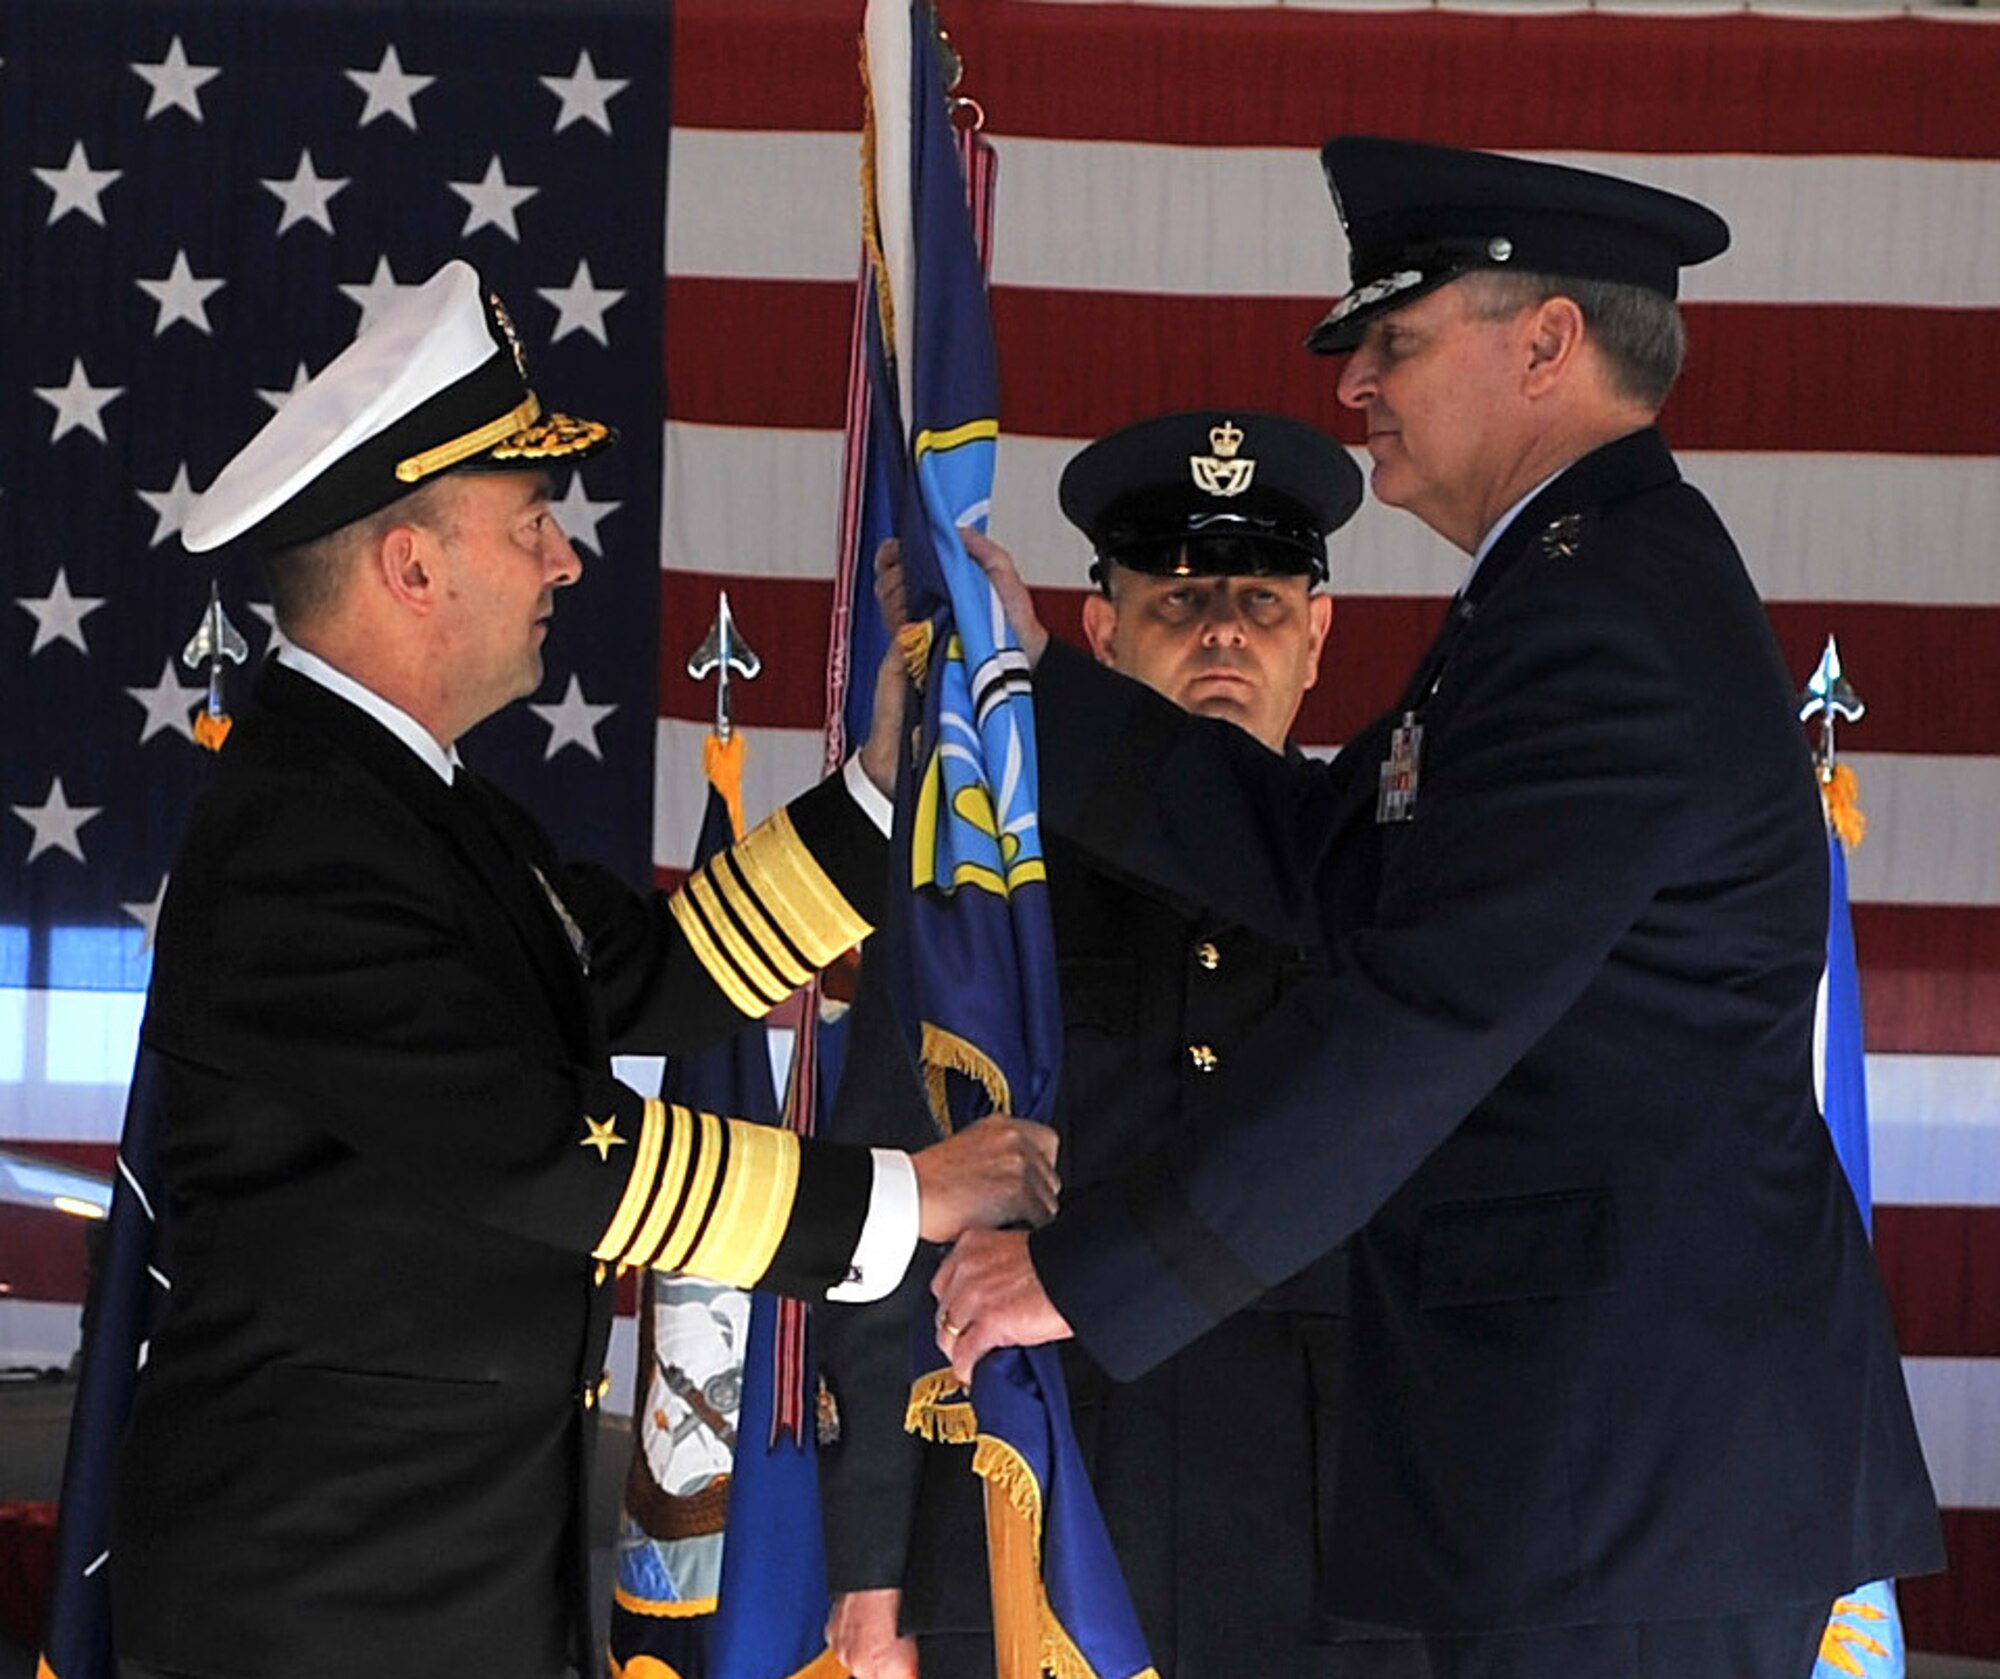 U.S. Navy Adm. James G. Stavridis, European Command and Supreme Allied Commander, Europe, gives Air Force Gen. Mark A. Welsh III, the command of U.S. Air Forces in Europe during a change of command ceremony, Ramstein Air Base, Germany, Dec. 13, 2010. Gen. Roger A. Brady, outgoing USAFE commander, relinquished command during the change of command ceremony after providing command and control for air, space and missile defense for activities in an area of operations covering almost one-fifth of the globe which included 51 countries in Europe, Asia, the Middle East, and the Arctic and Atlantic oceans. (U.S. Air Force photo by Senior Airman Caleb Pierce)